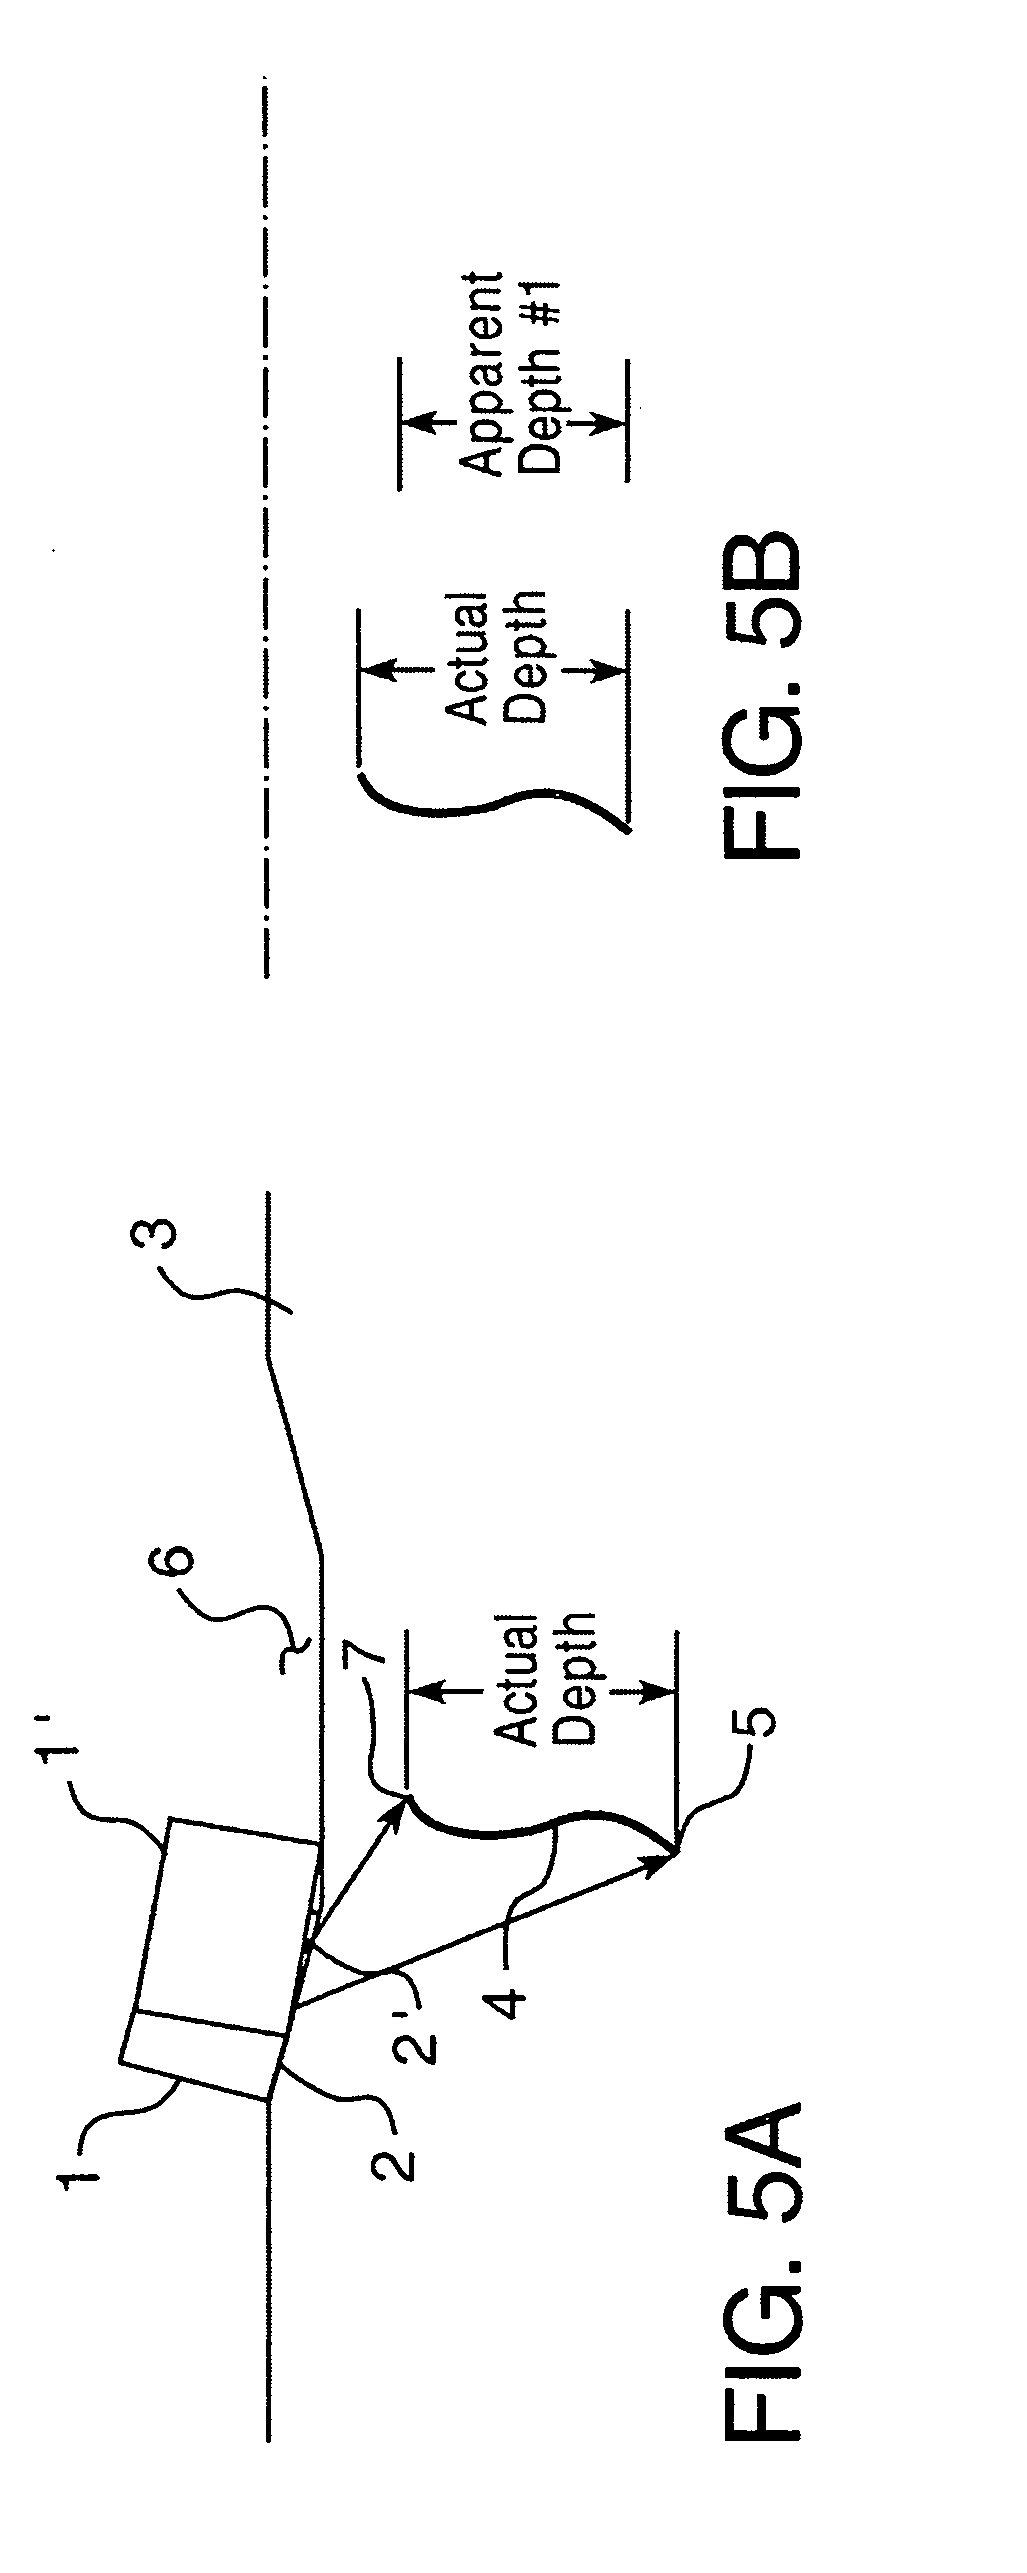 Device and method for ultrasonic inspection using profilometry data